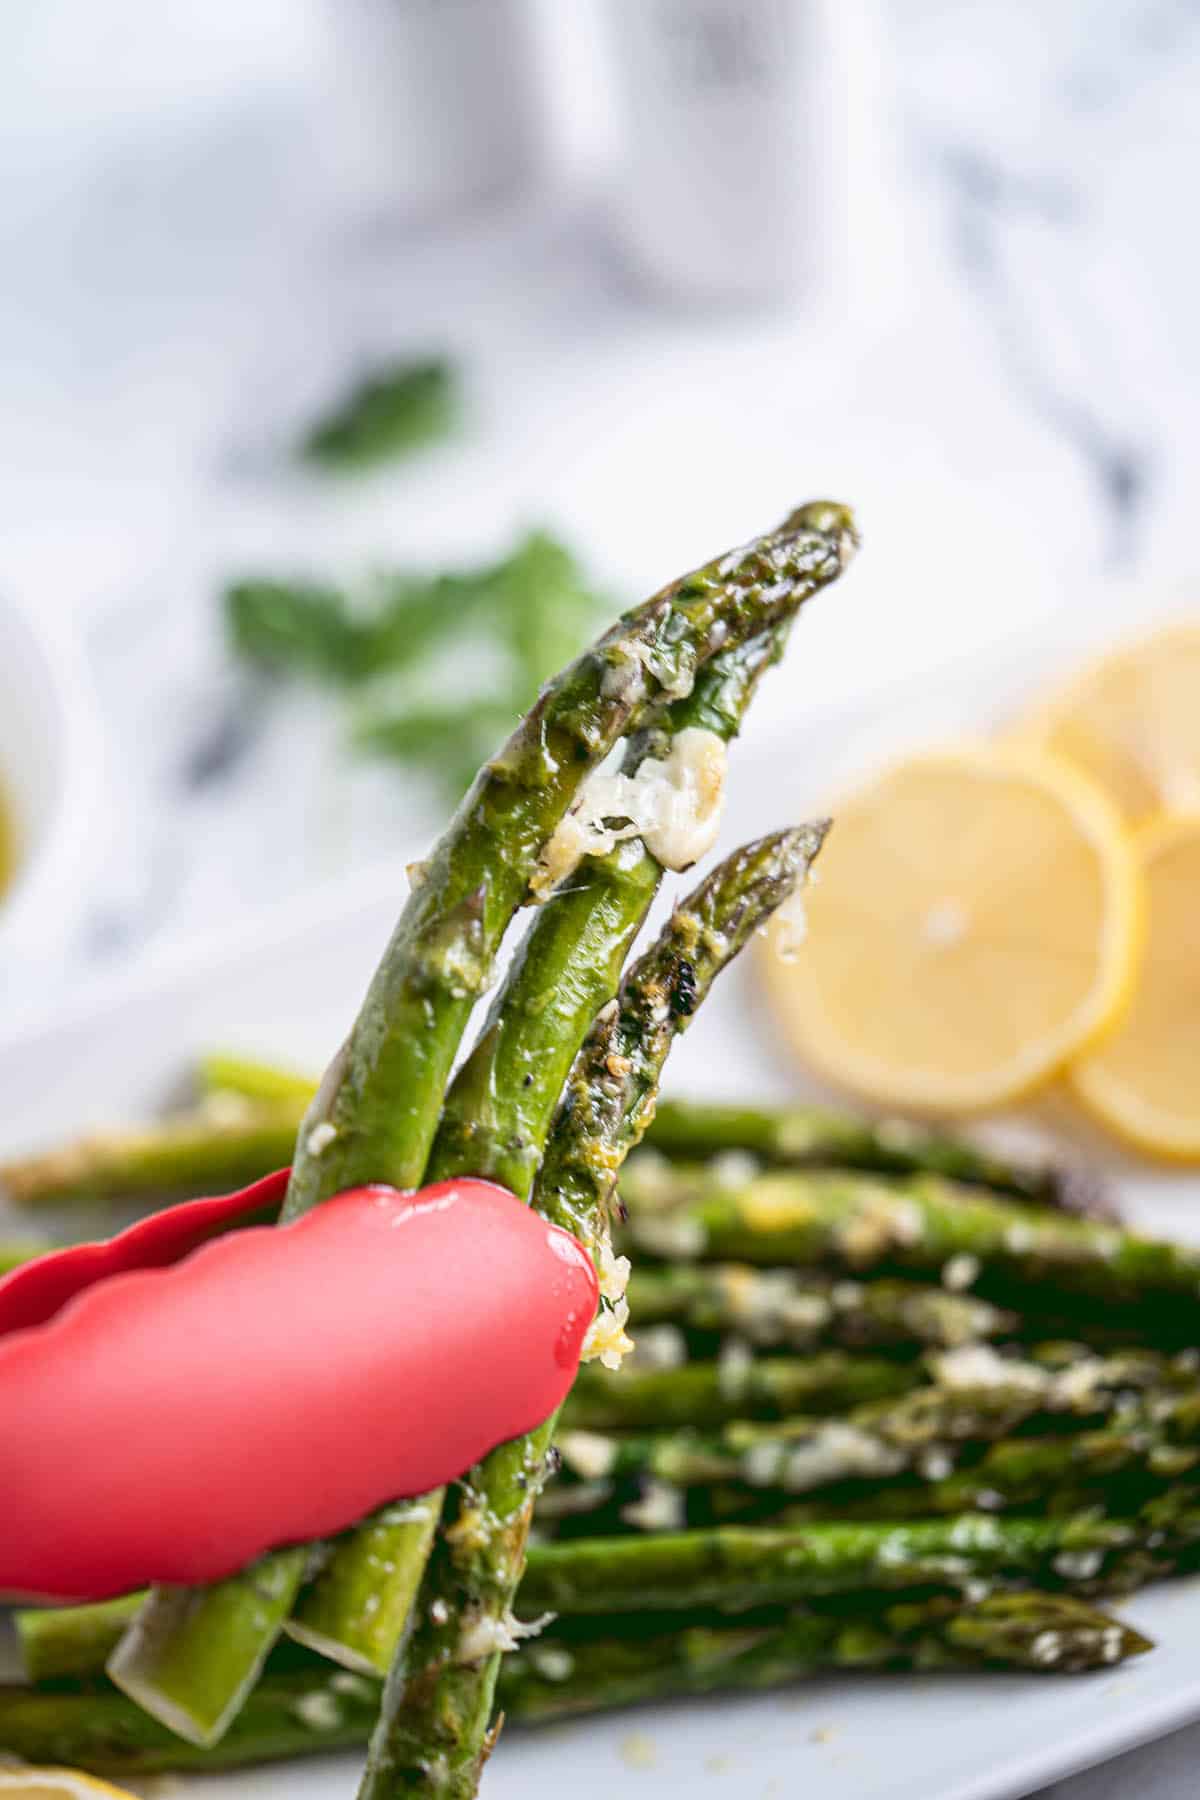 Tong holding spears of cooked asparagus.